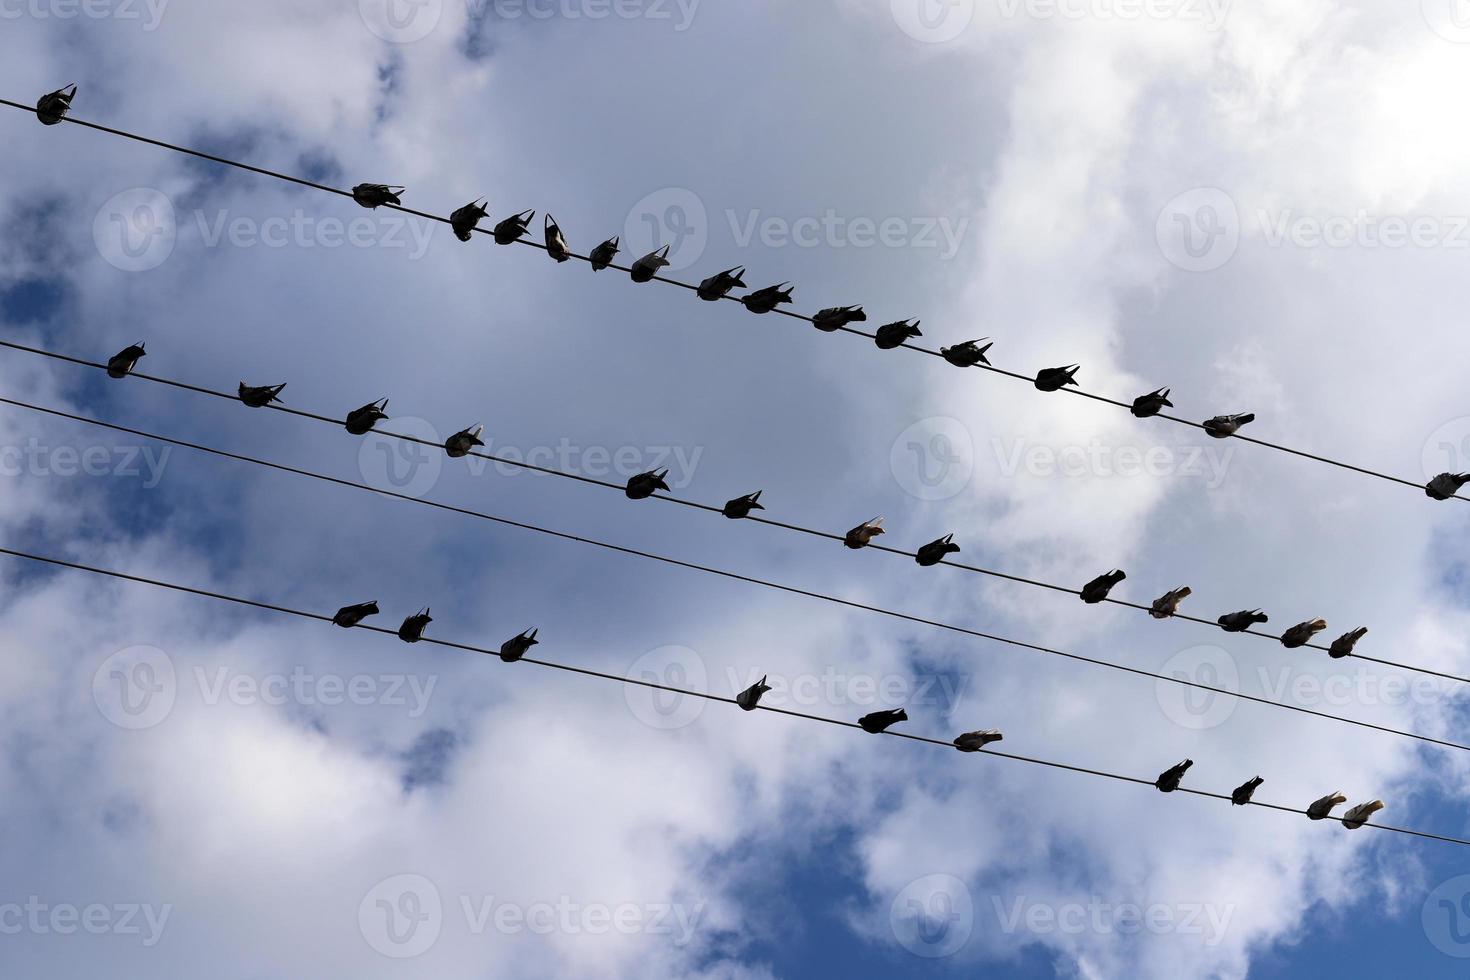 Birds sit on wires carrying electricity. photo